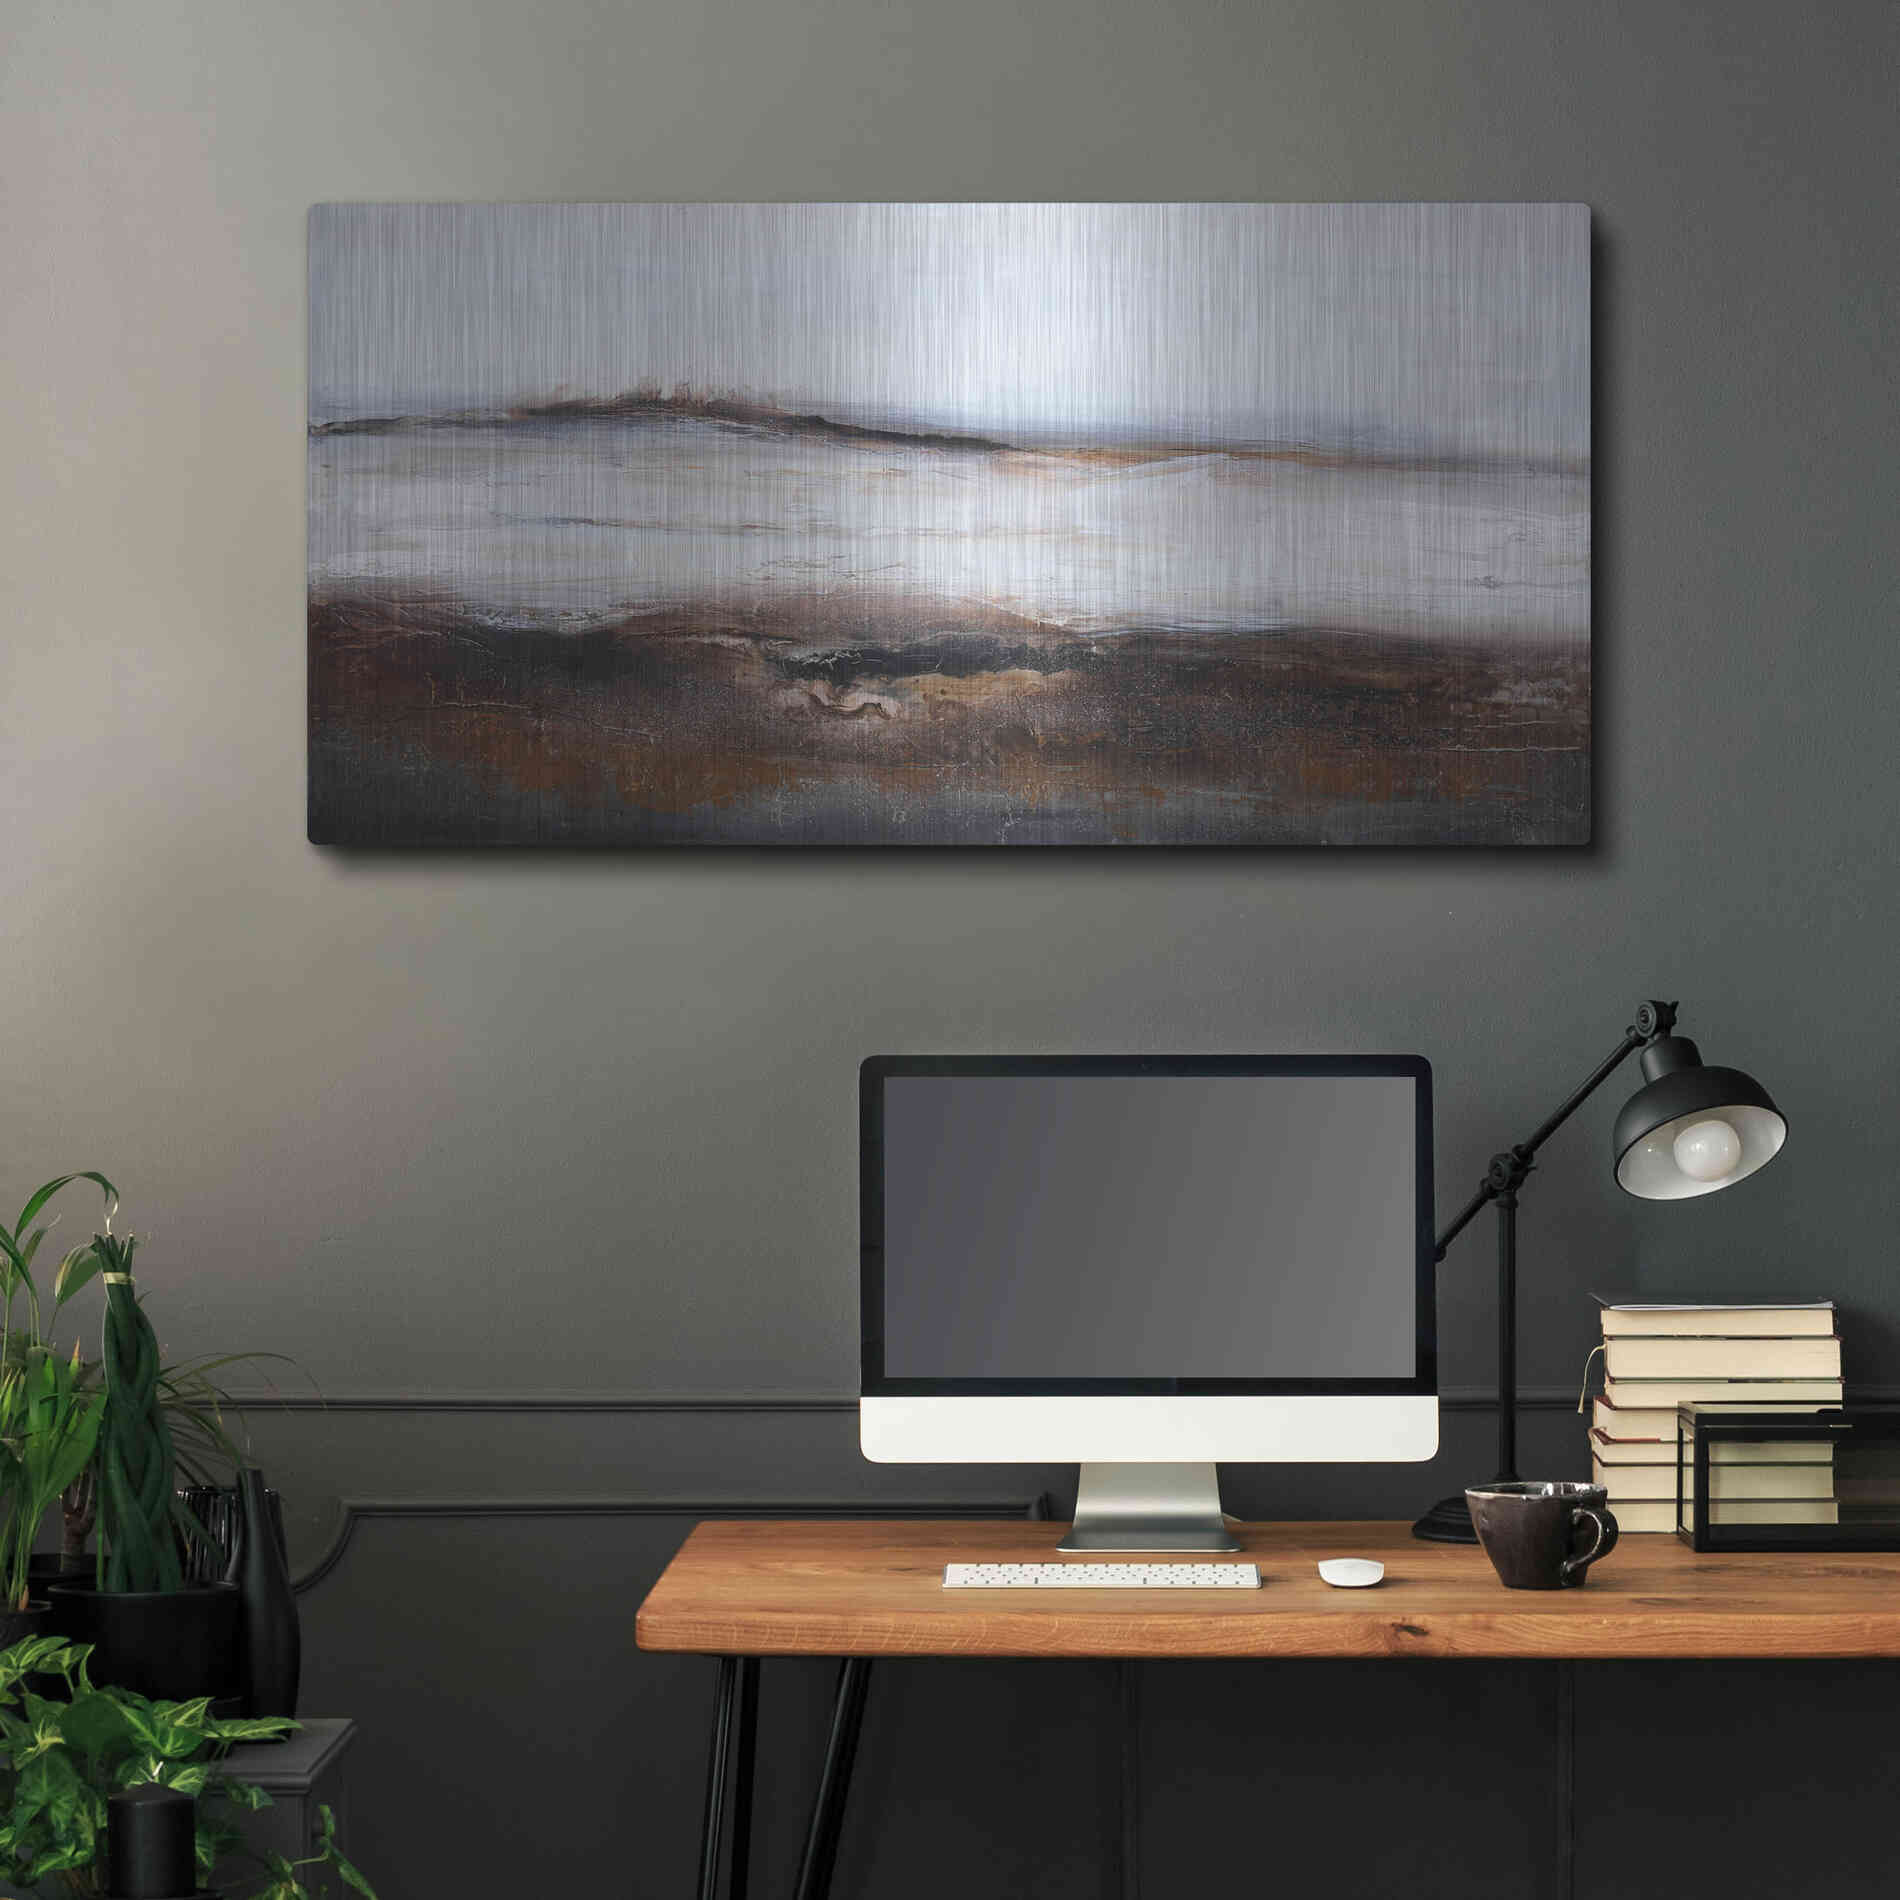 Luxe Metal Art 'Over and Out' by Design Fabrikken, Metal Wall Art,48x24